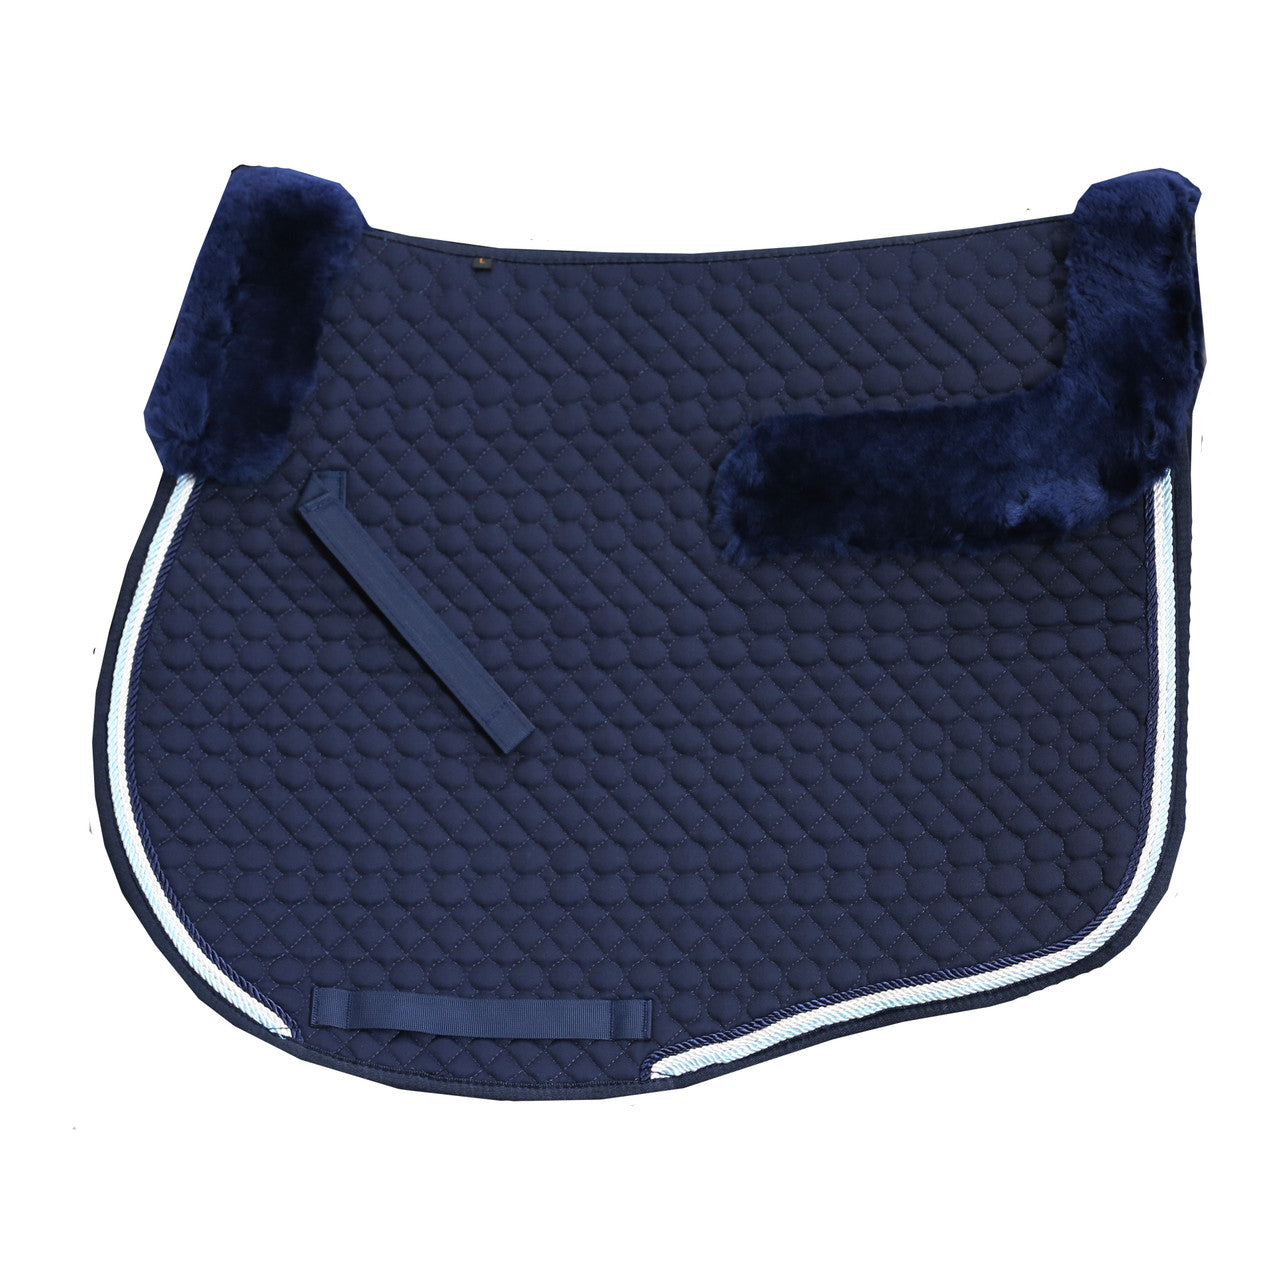 Navy PONY Saddle pad with Sheepskin topper and Sky blue and white Ropes